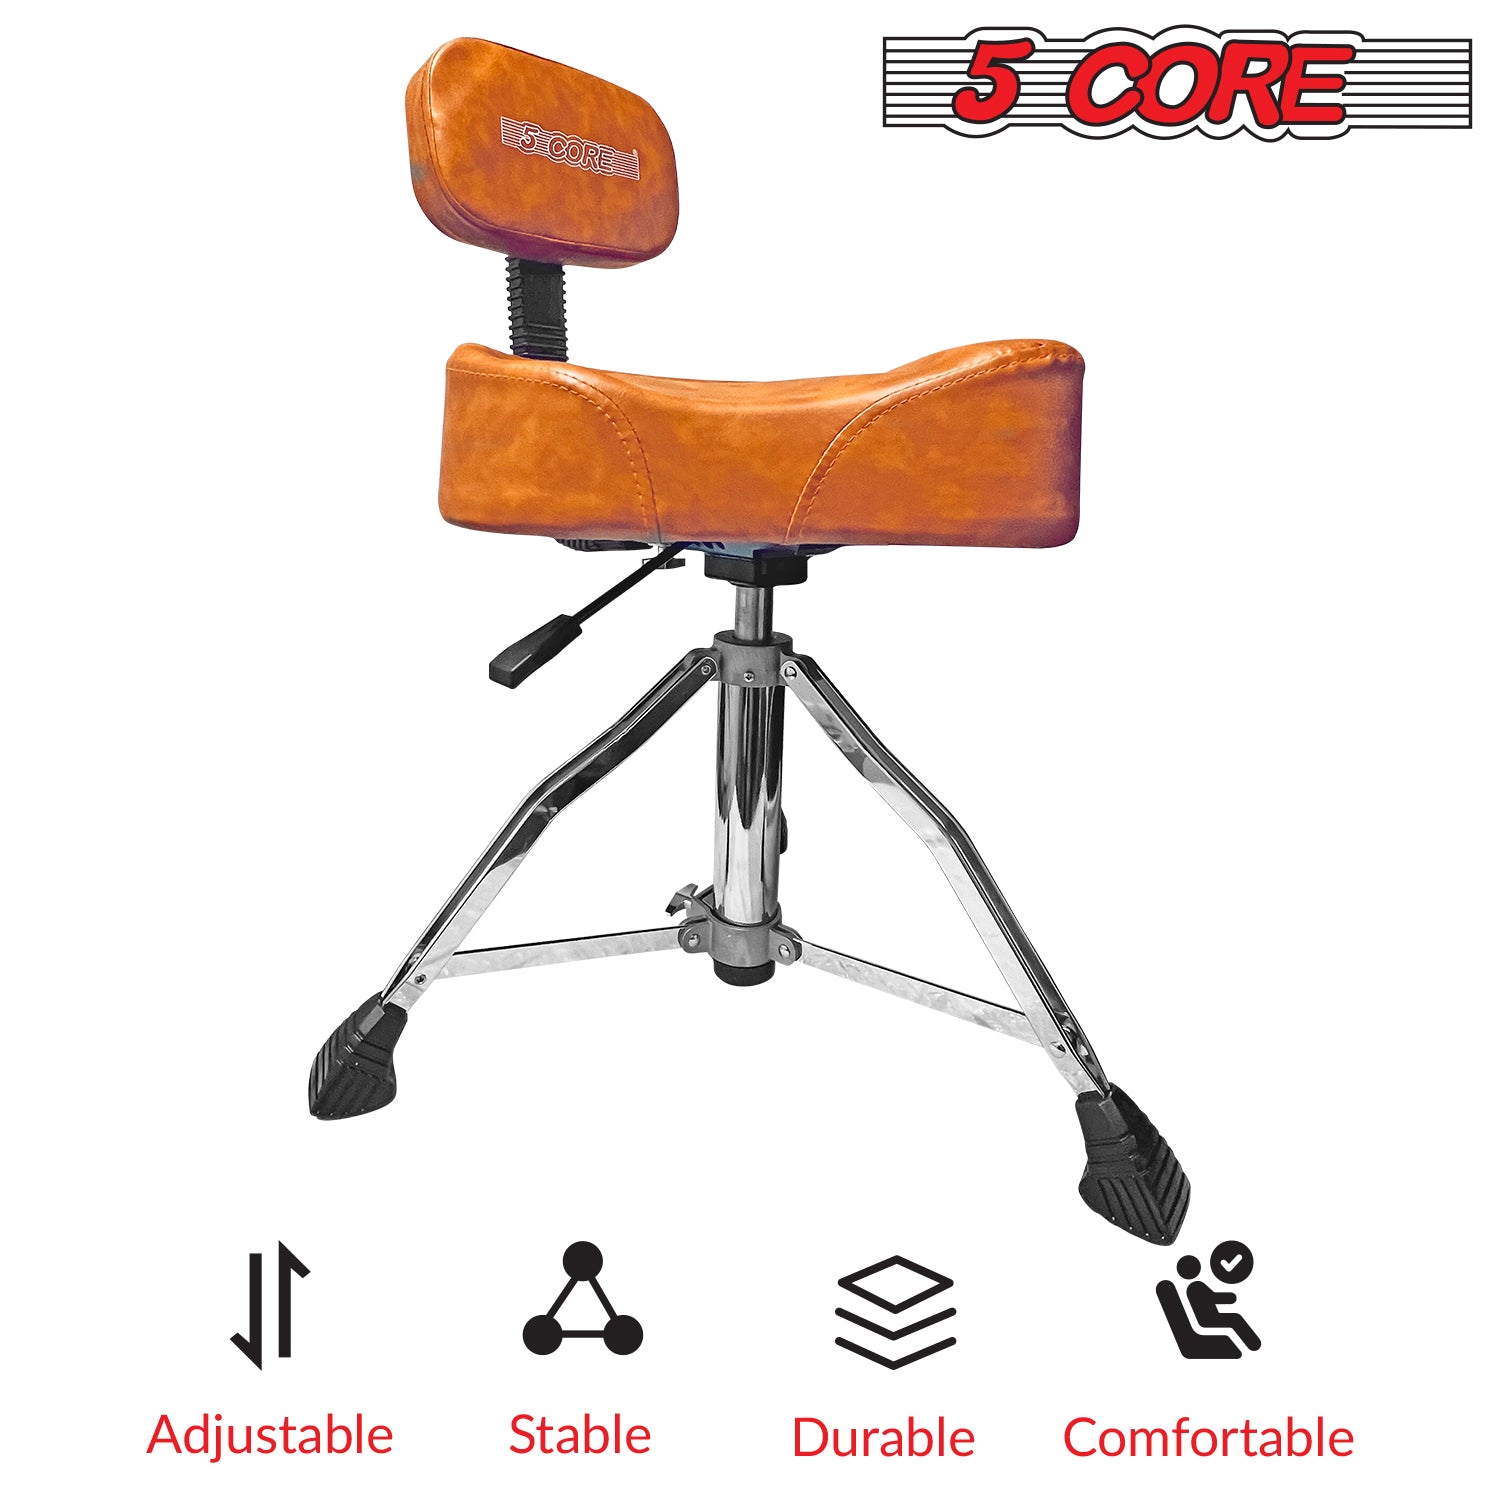 adjustable, stable, durable and comfortable drum throne